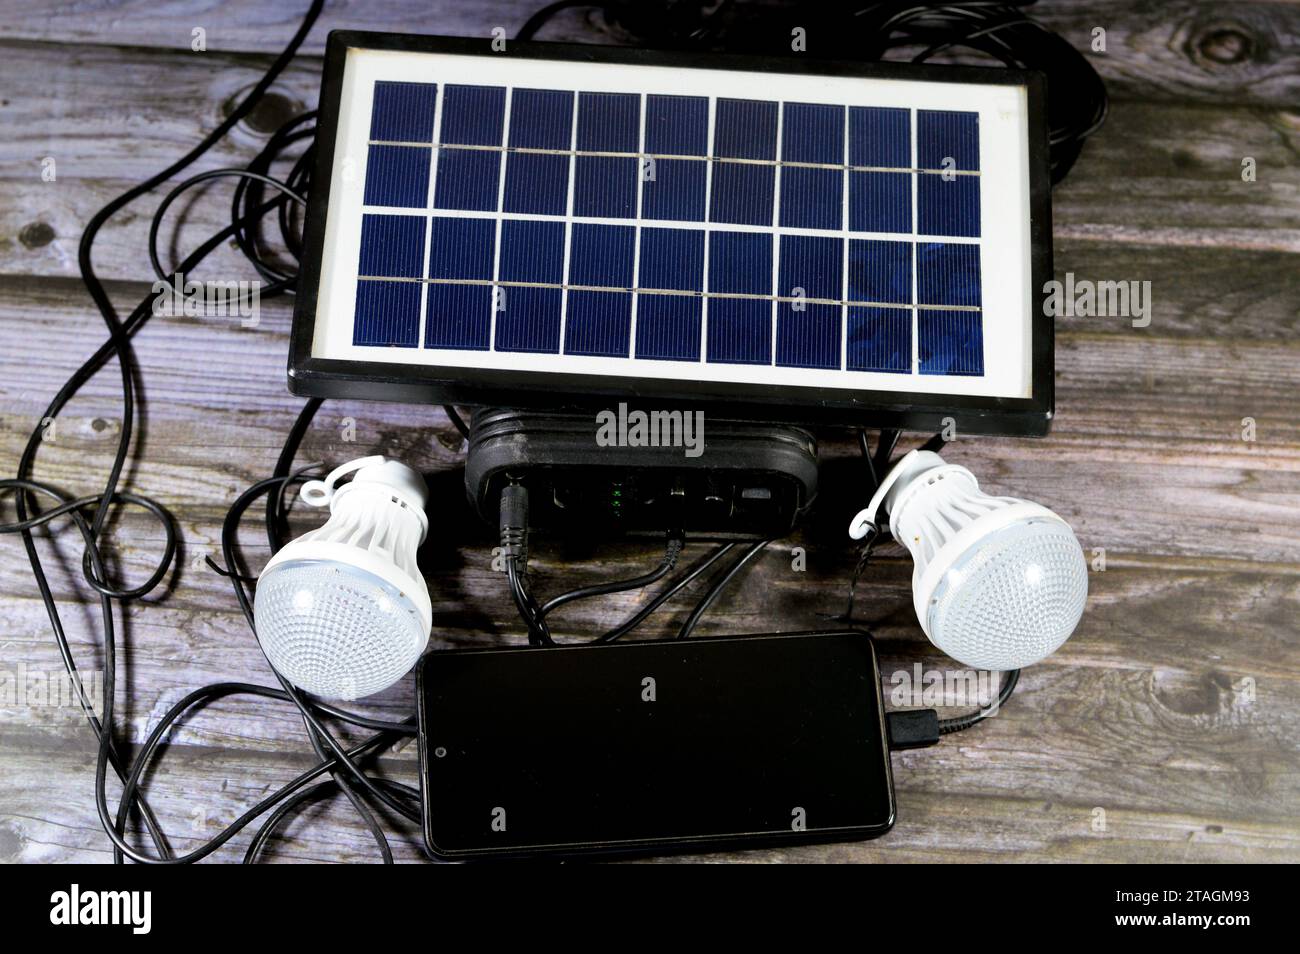 A multi purpose battery charged with a solar panel, a device that converts sunlight into electricity by using photovoltaic (PV) cells, with charging c Stock Photo